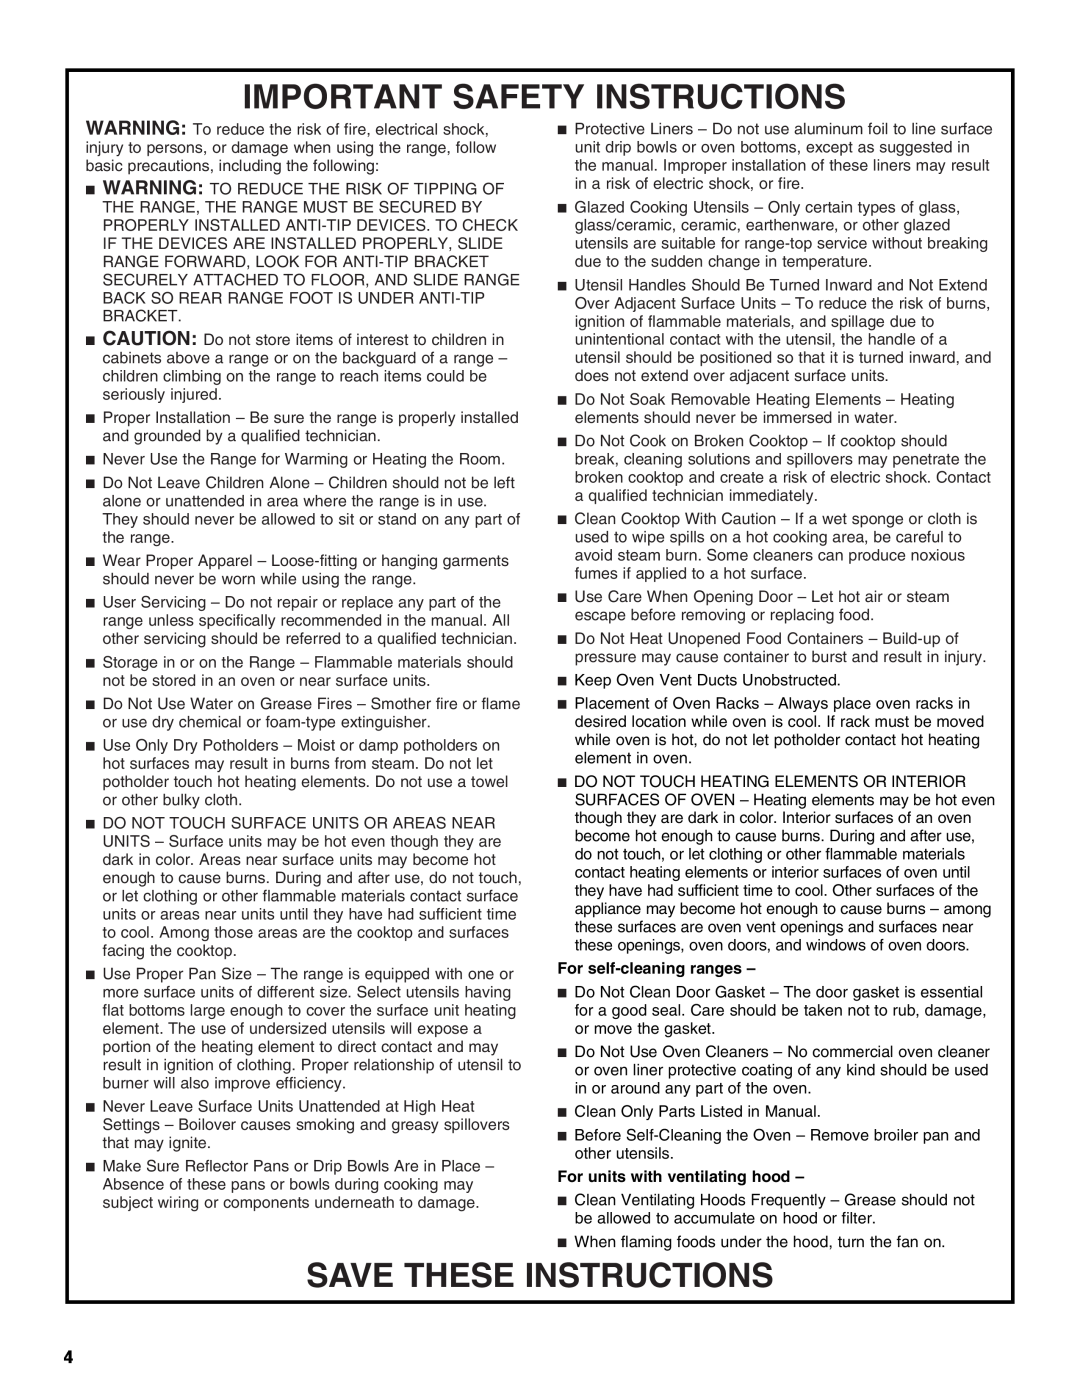 Whirlpool RF3020XKQ2 manual Important Safety Instructions, Save These Instructions, For self-cleaning ranges 